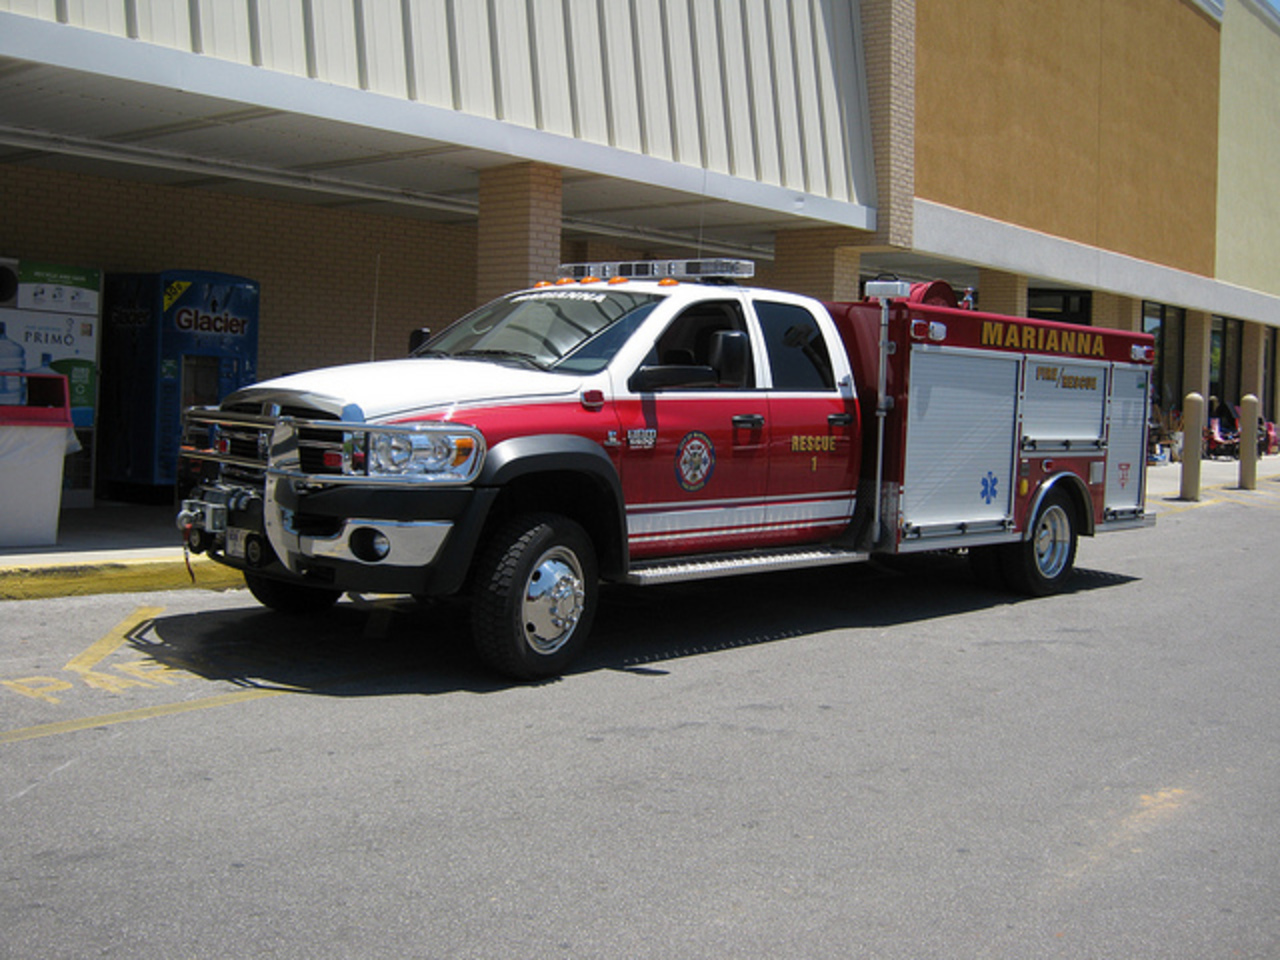 Flickr: The Florida Fire Apparatus & Stations Pool